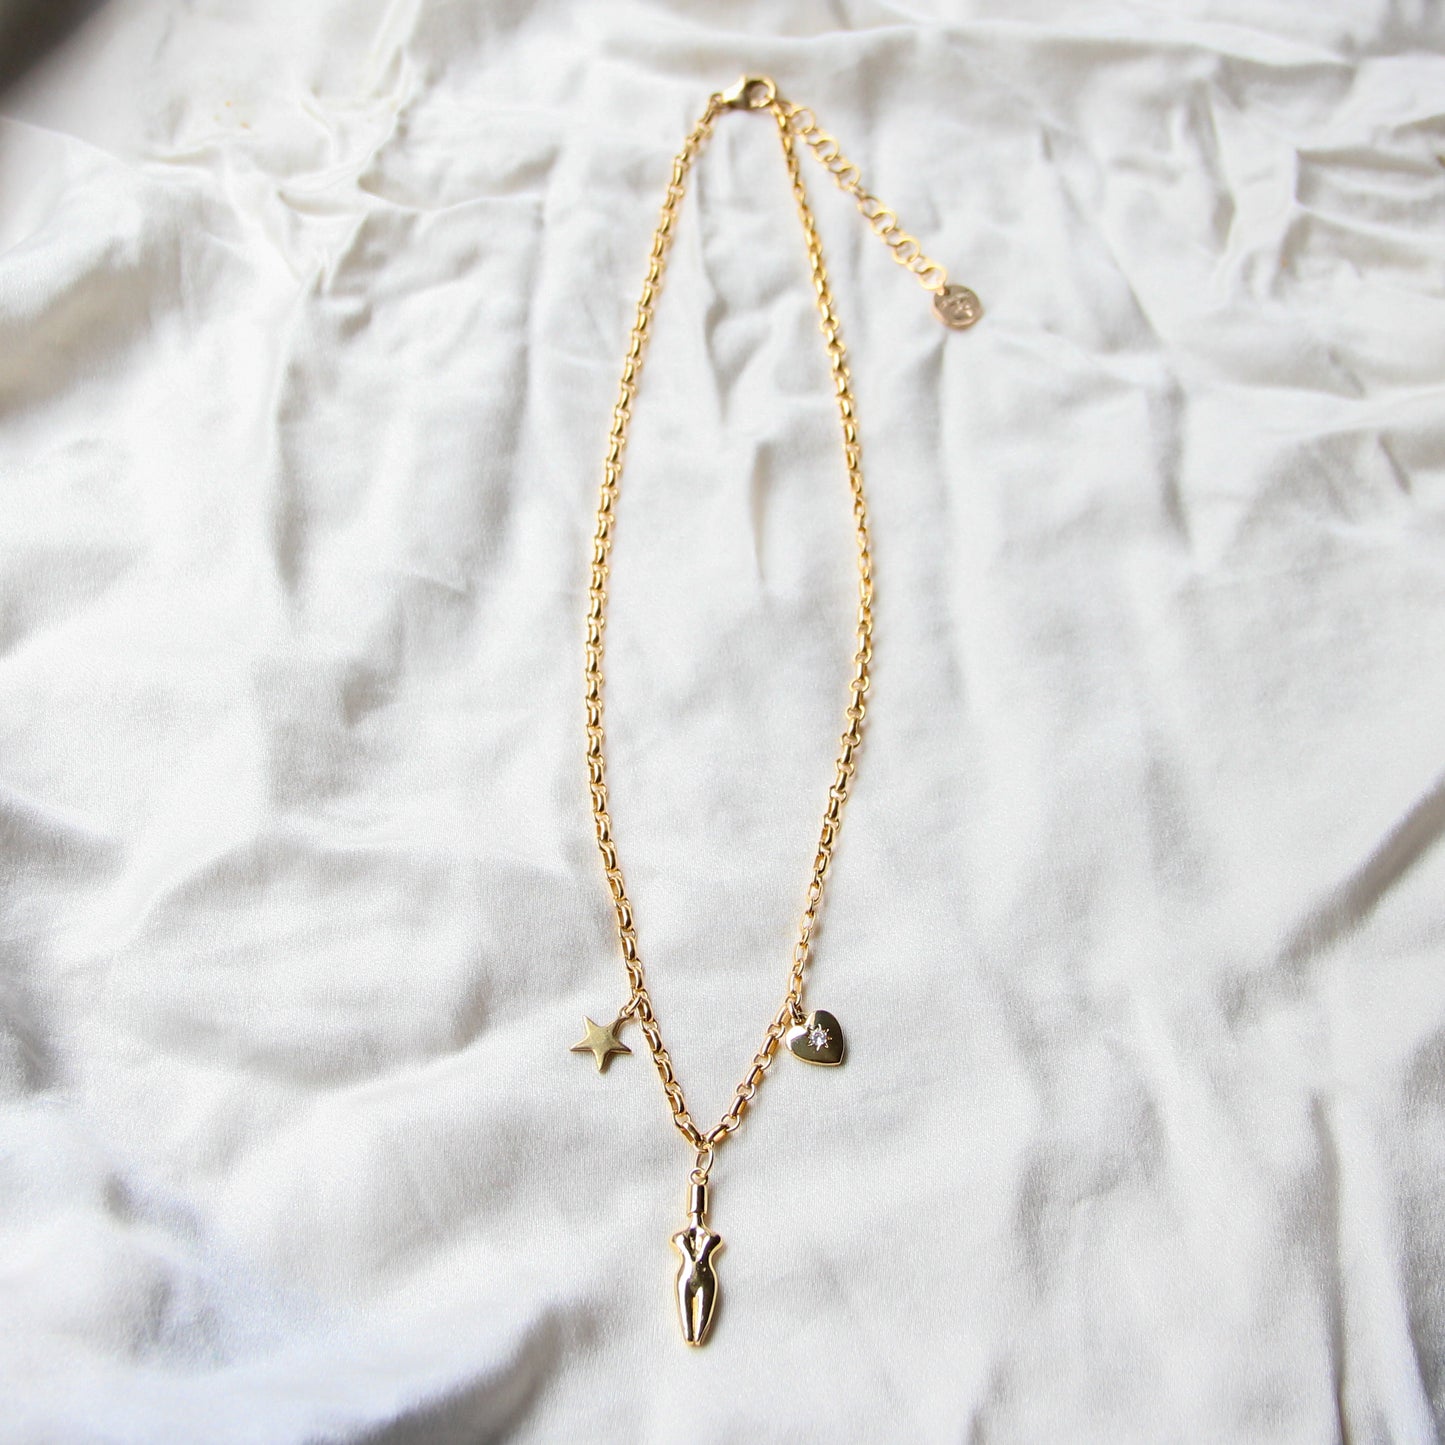 A flat-lay image of a 3 charm gold-filled necklace with an extender chain on a white surface. Necklace can be adjustable from 16 inches to 18 inches. Necklace has a star, body, and a cubic zirconia heart charm.